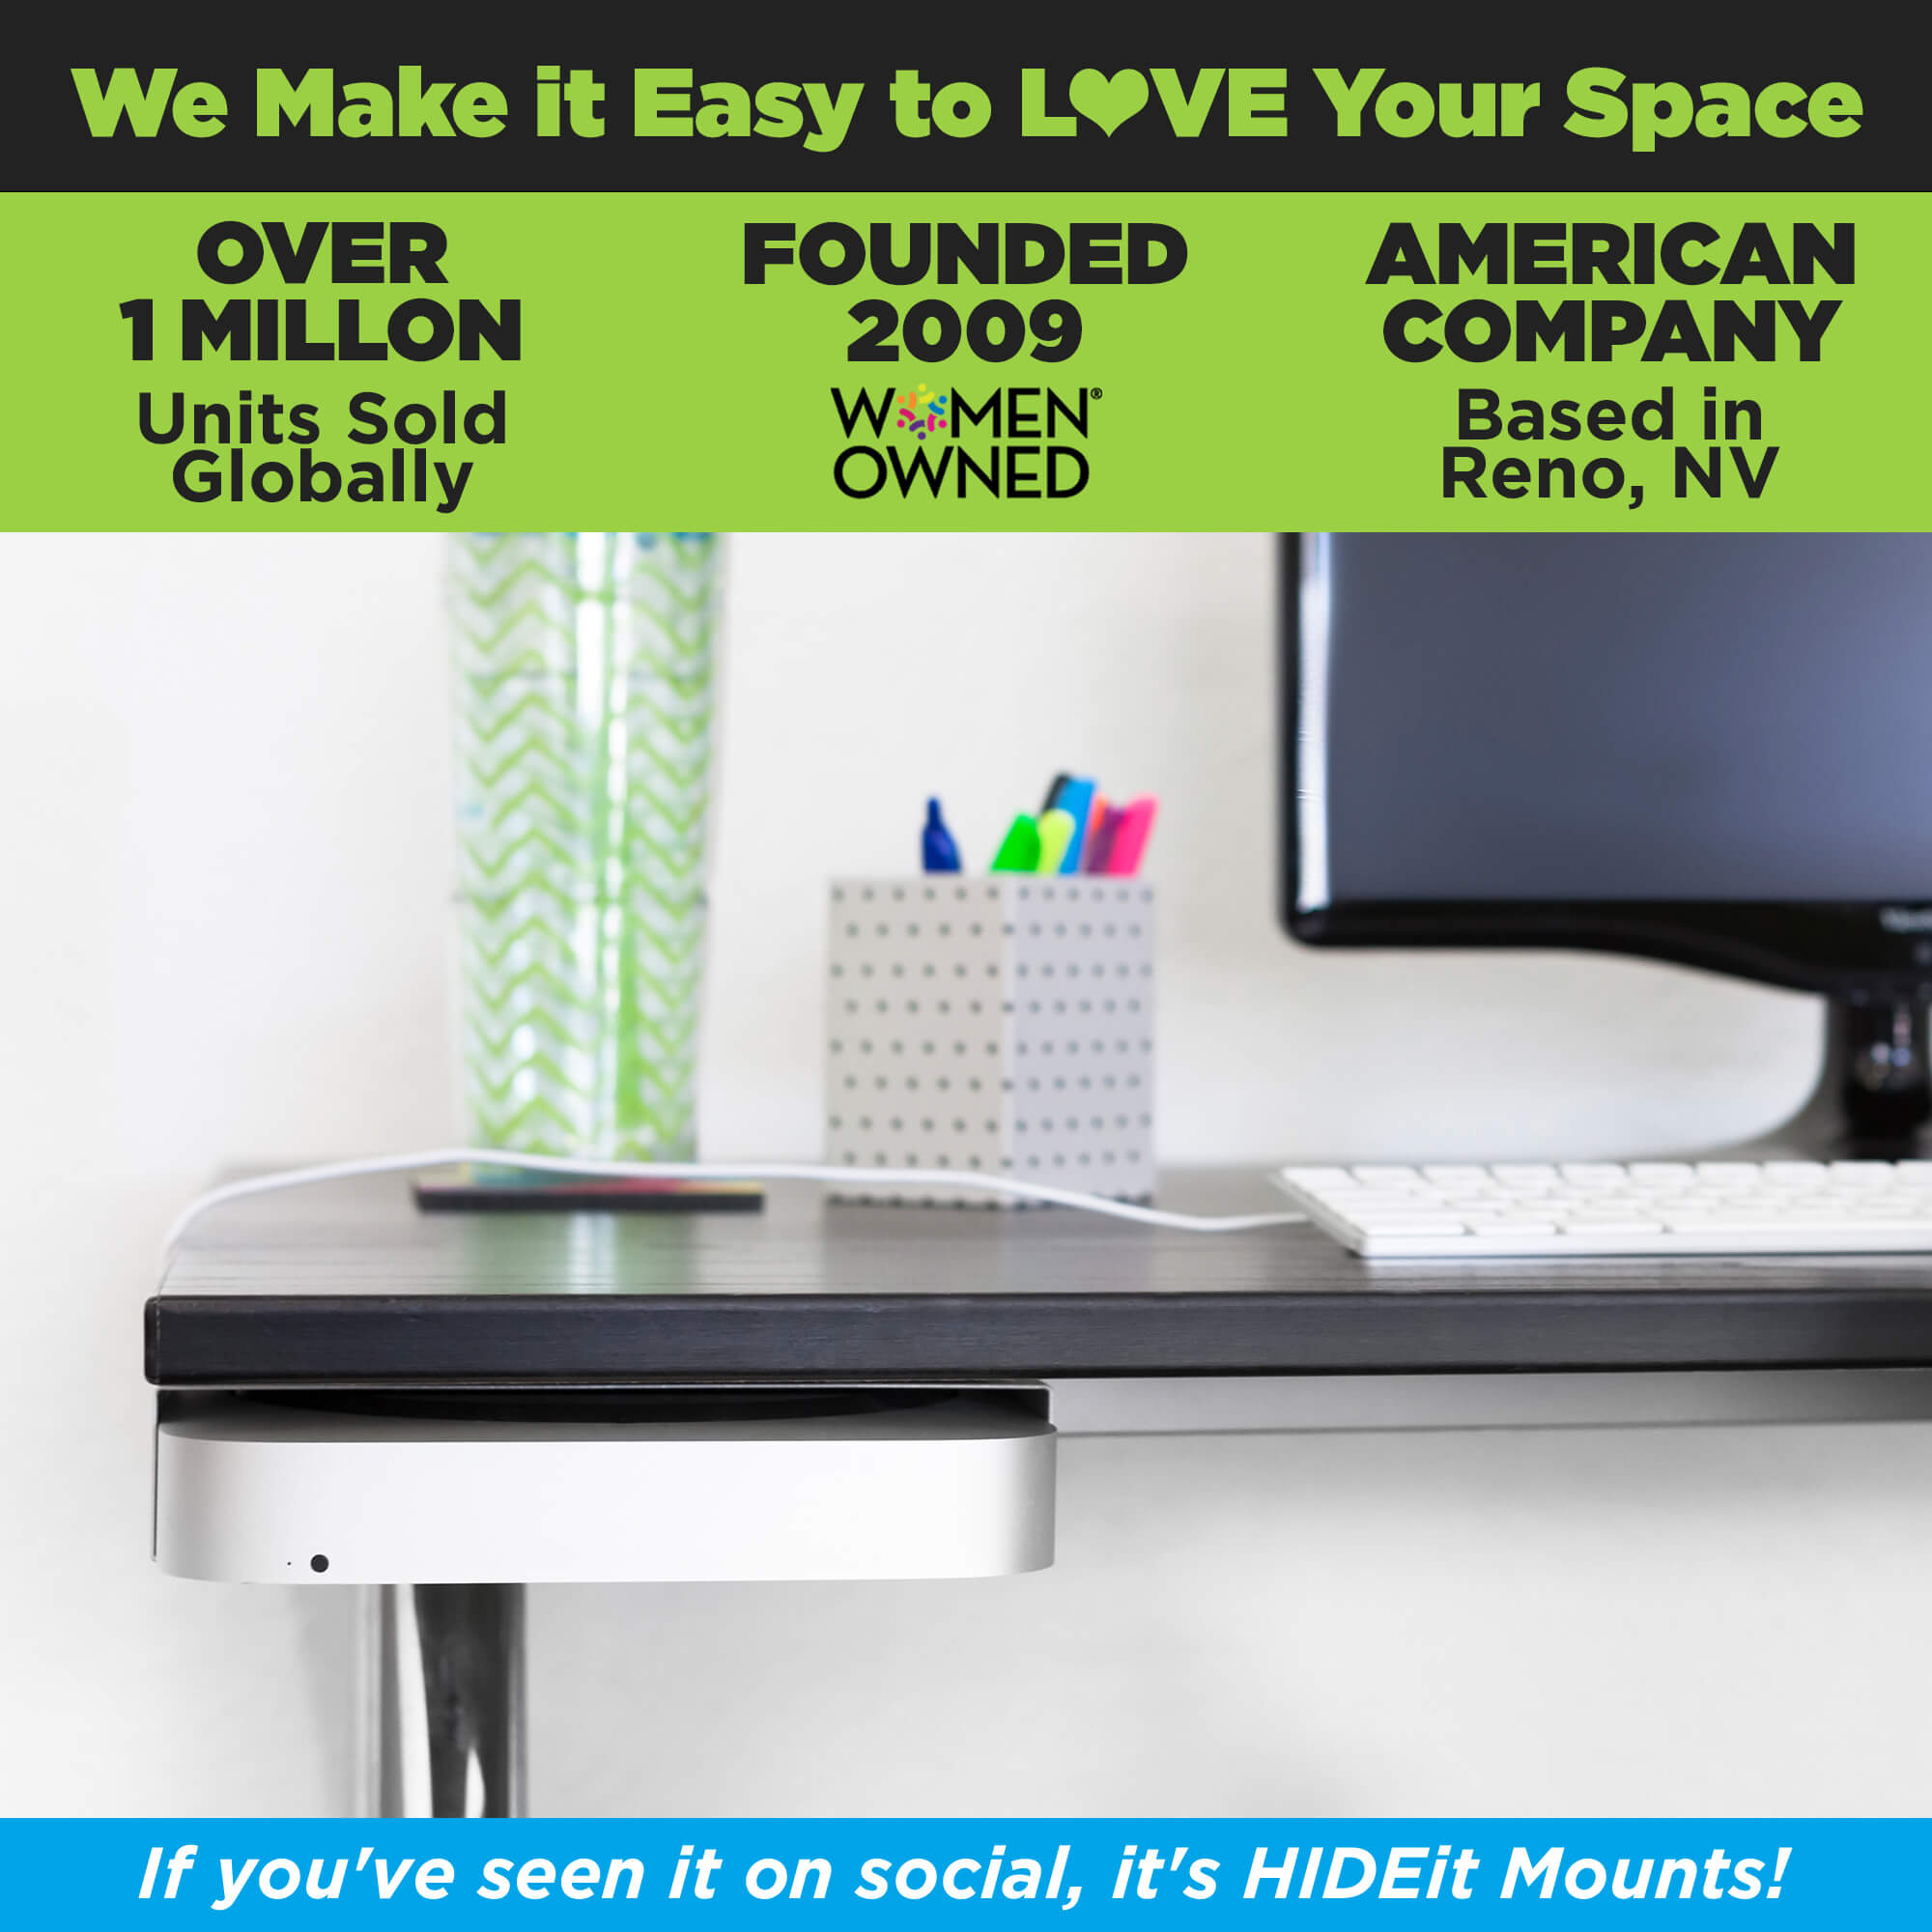 HIDEit Mounts makes it easy to love your space! HIDEit is an American company with over 1 million units sold globally. 